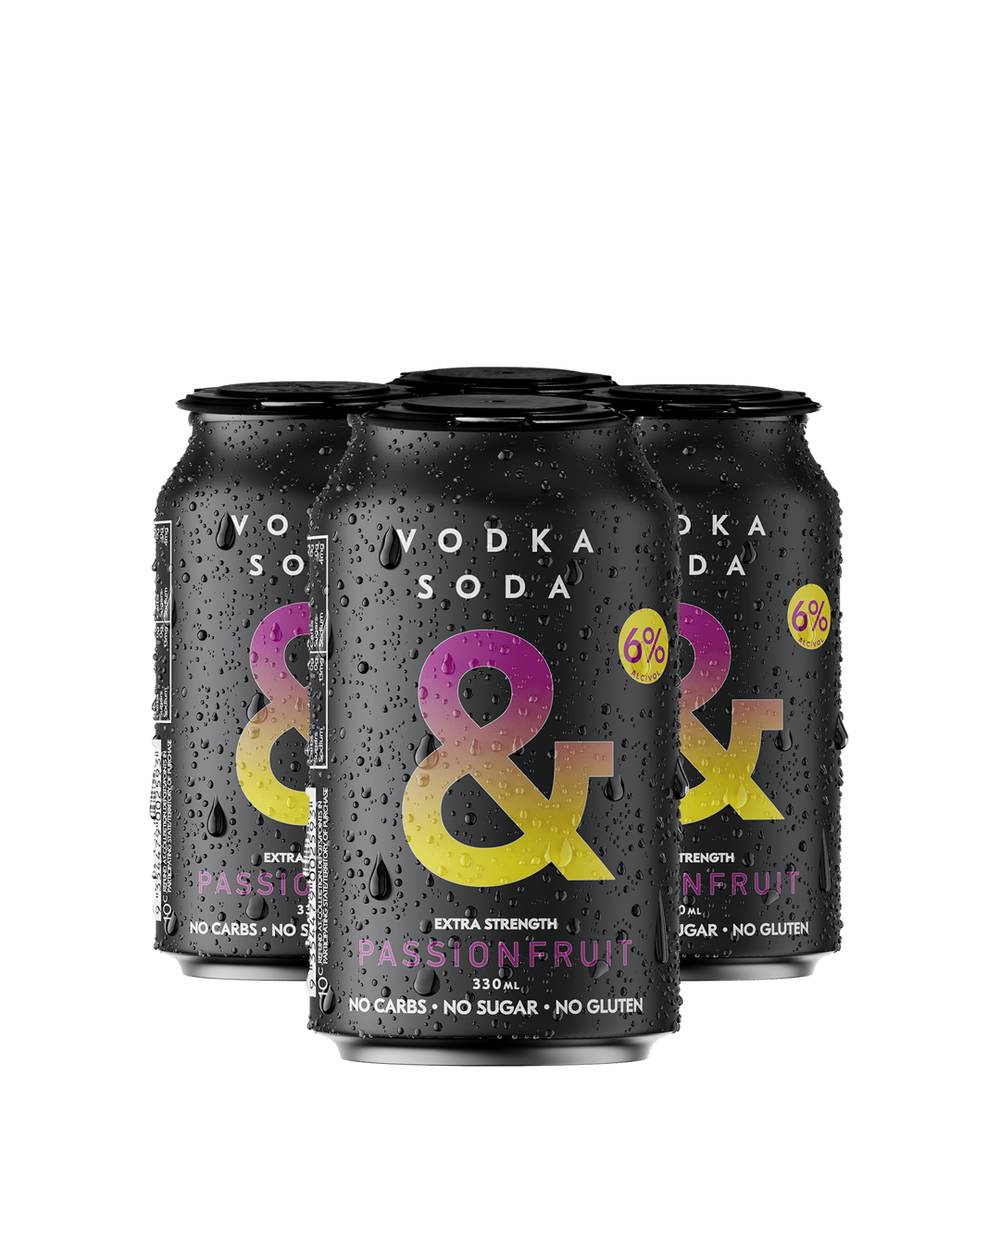 Ampersand Projects Vodka Soda Passionfruit (4 Pack, 330 mL)